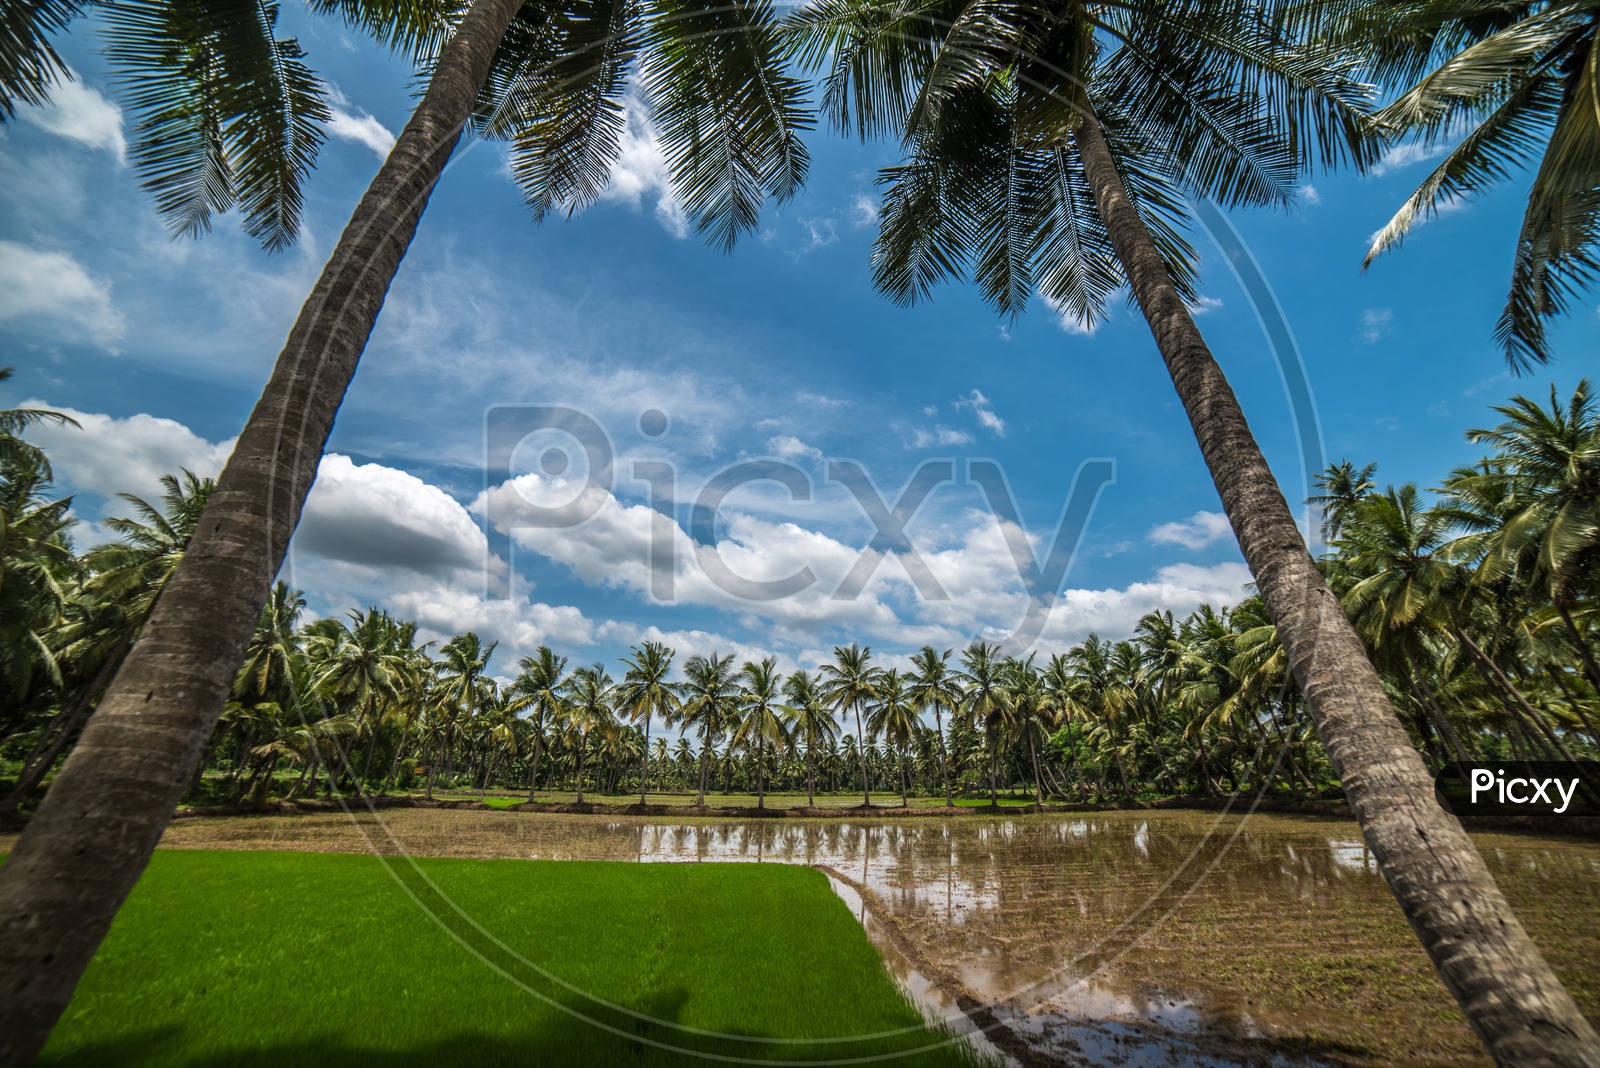 coconut groves